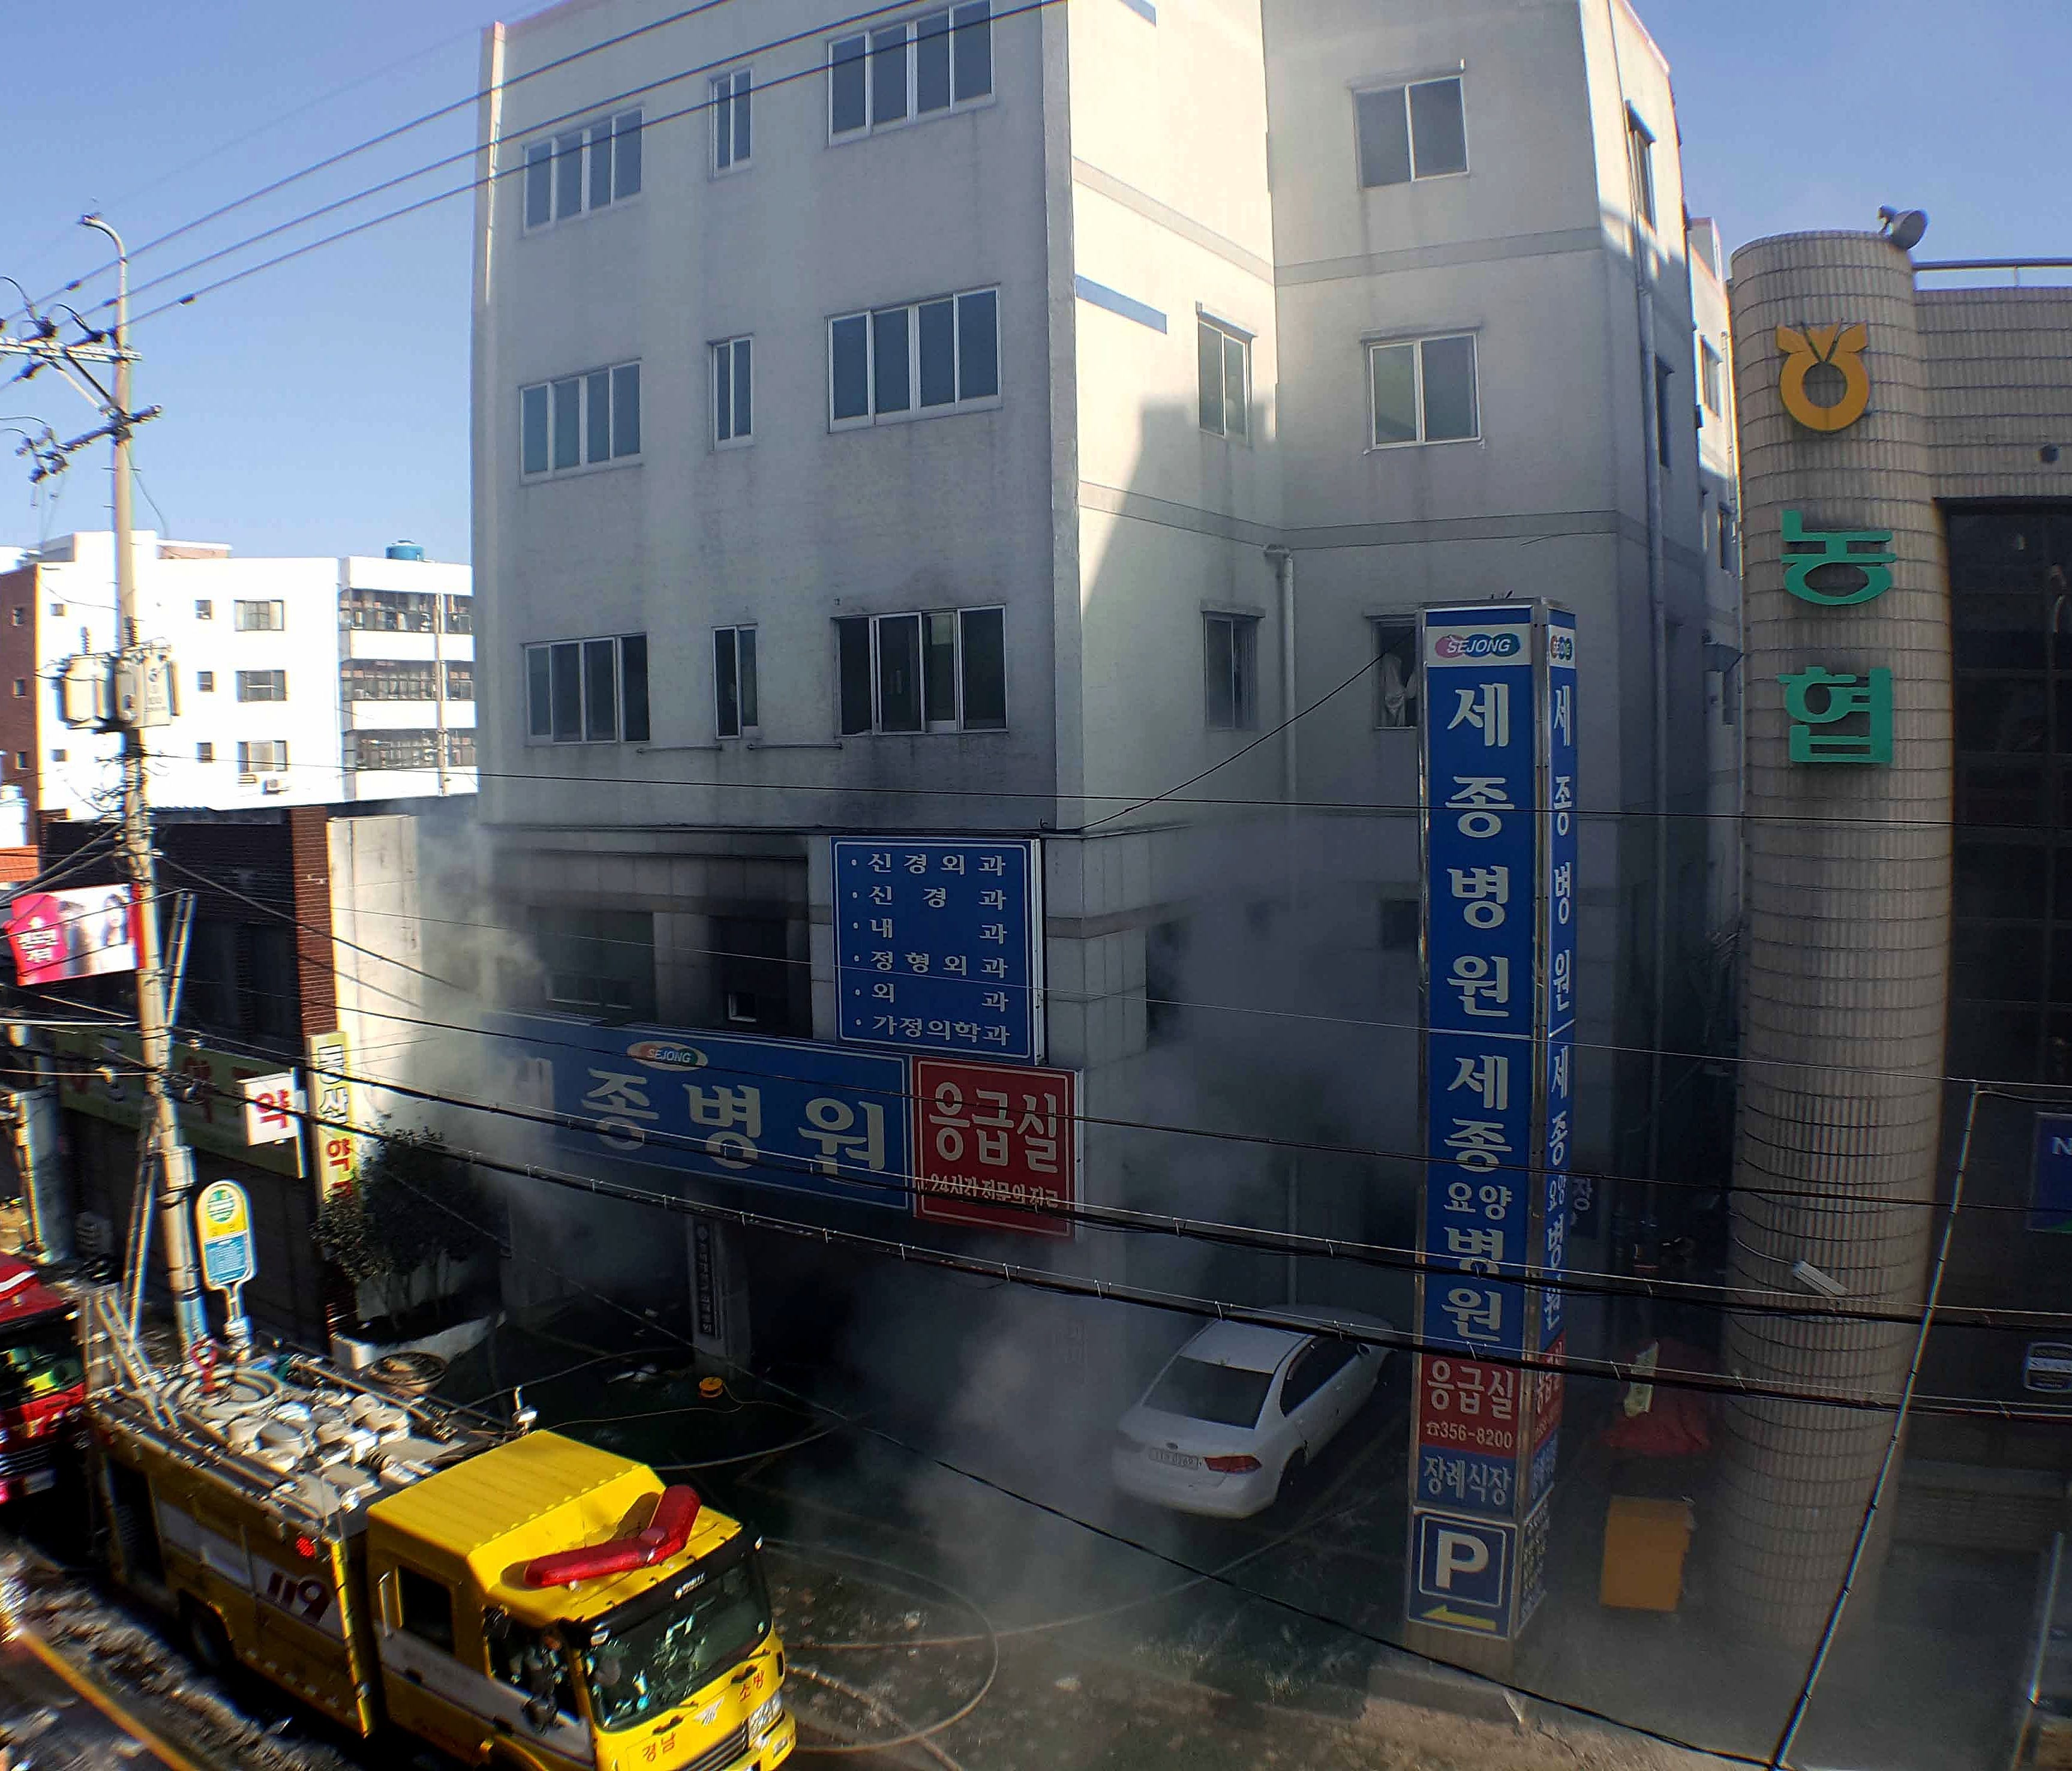 Rescue workers are pictured searching through a scorched, smoke-filled hospital in Miryang, South Korea.